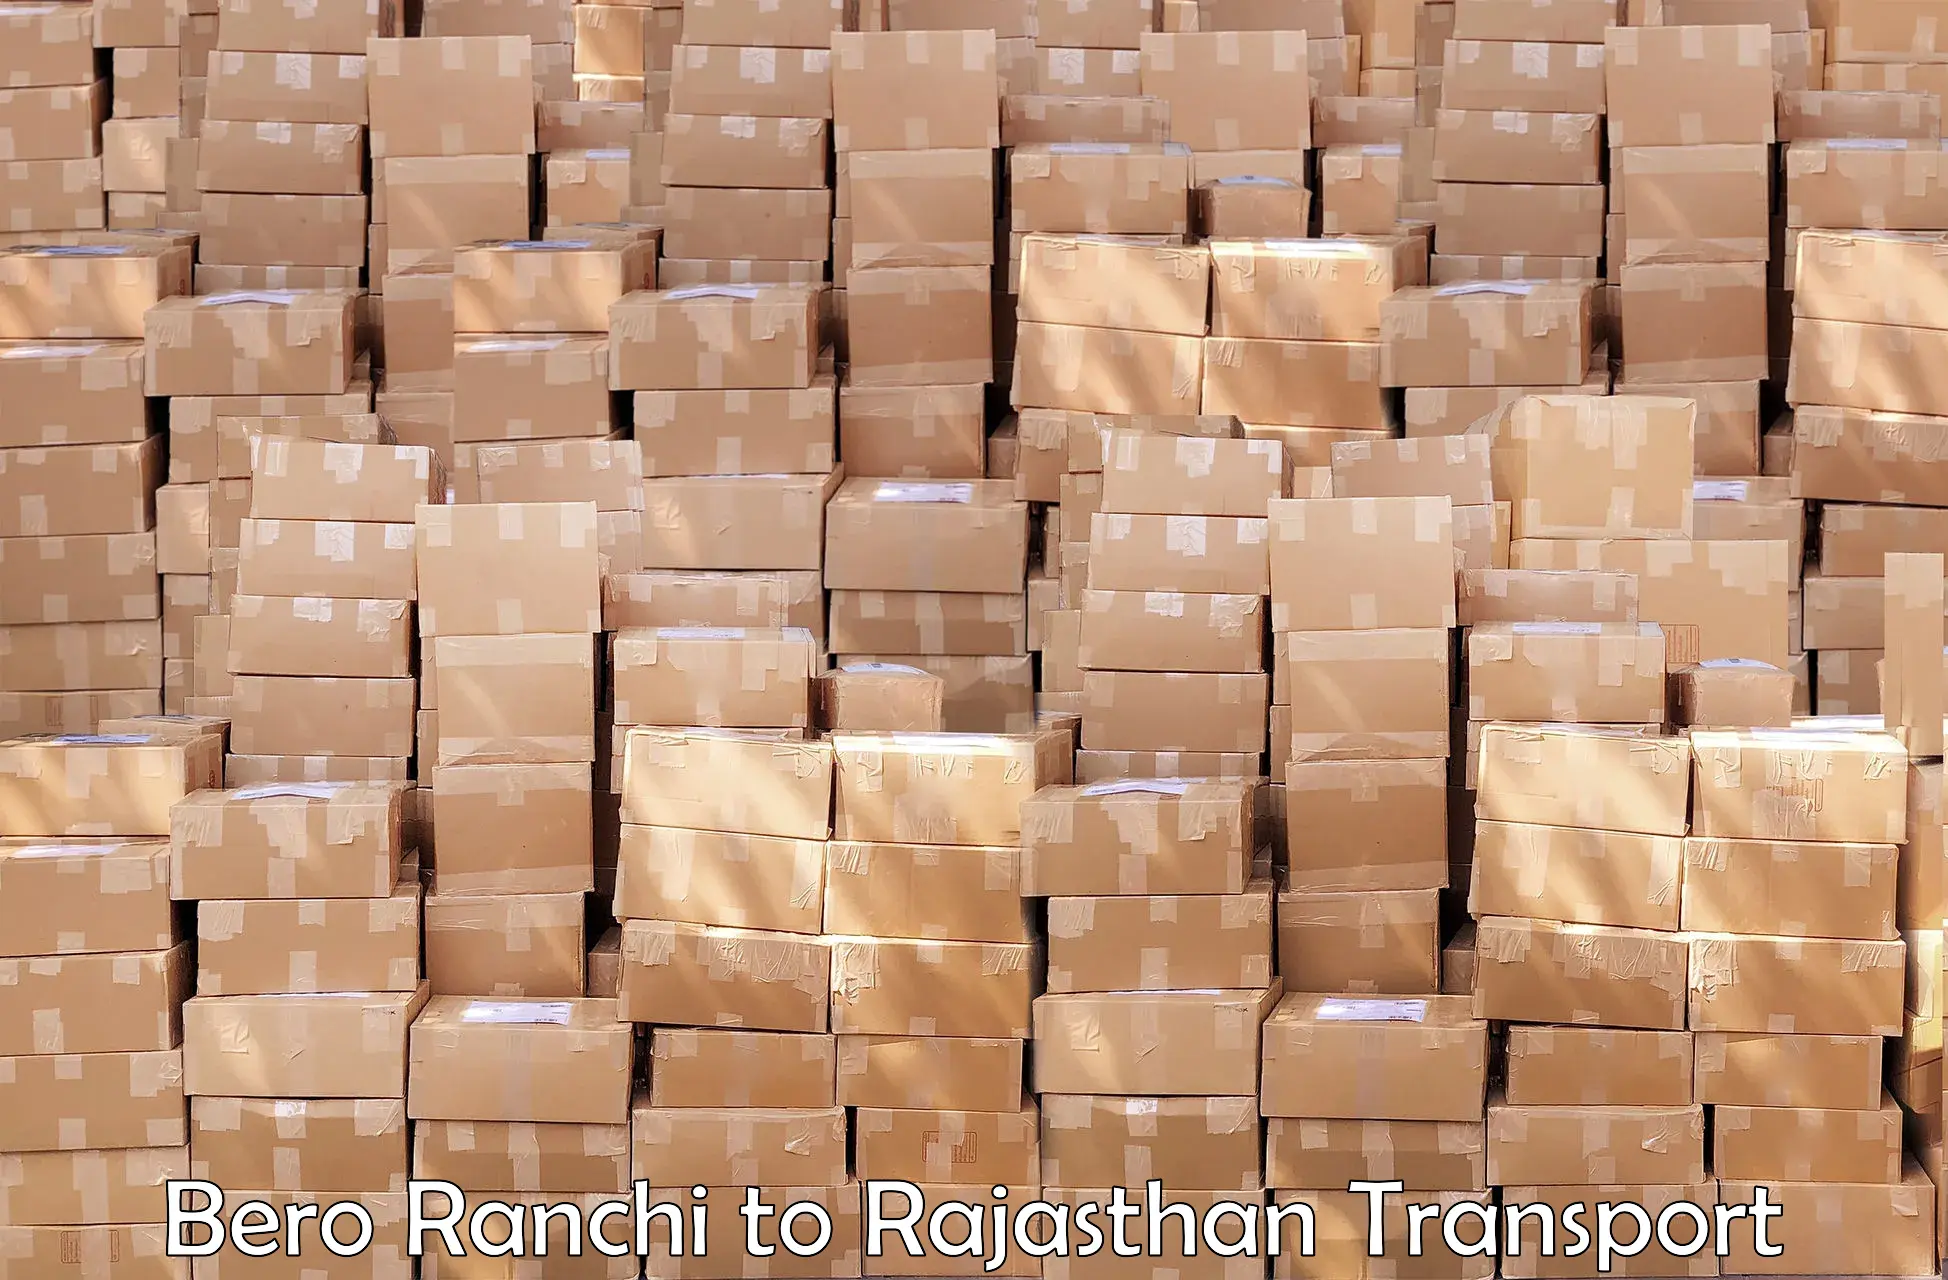 Air freight transport services Bero Ranchi to Jalore